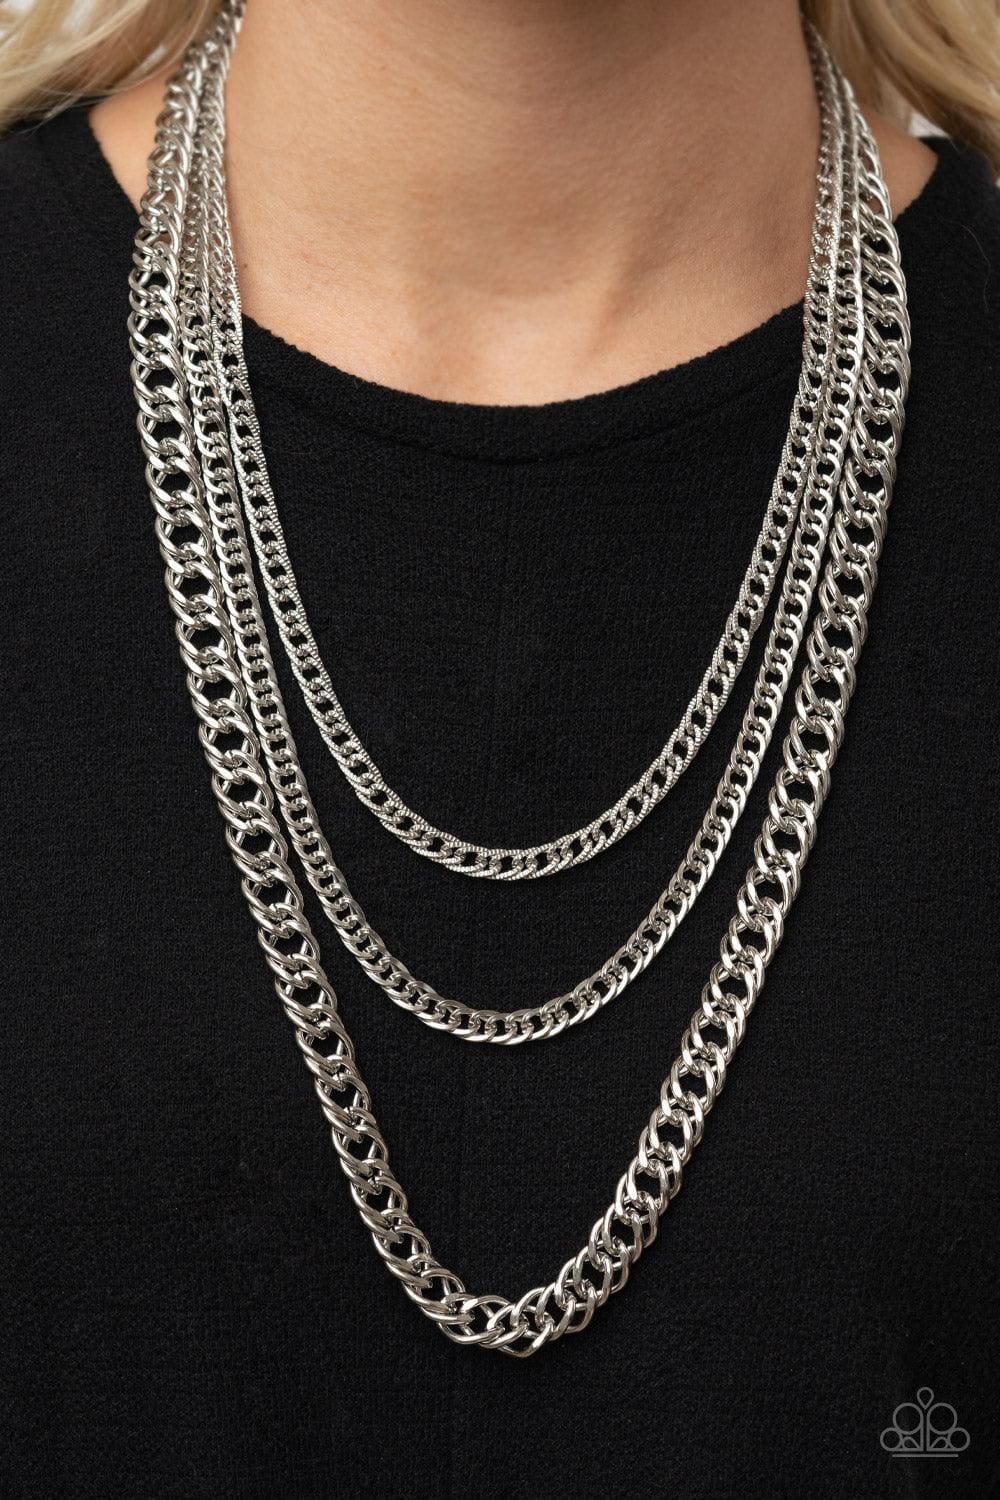 Paparazzi Accessories - Chain Of Champions - Silver Necklace - Bling by JessieK